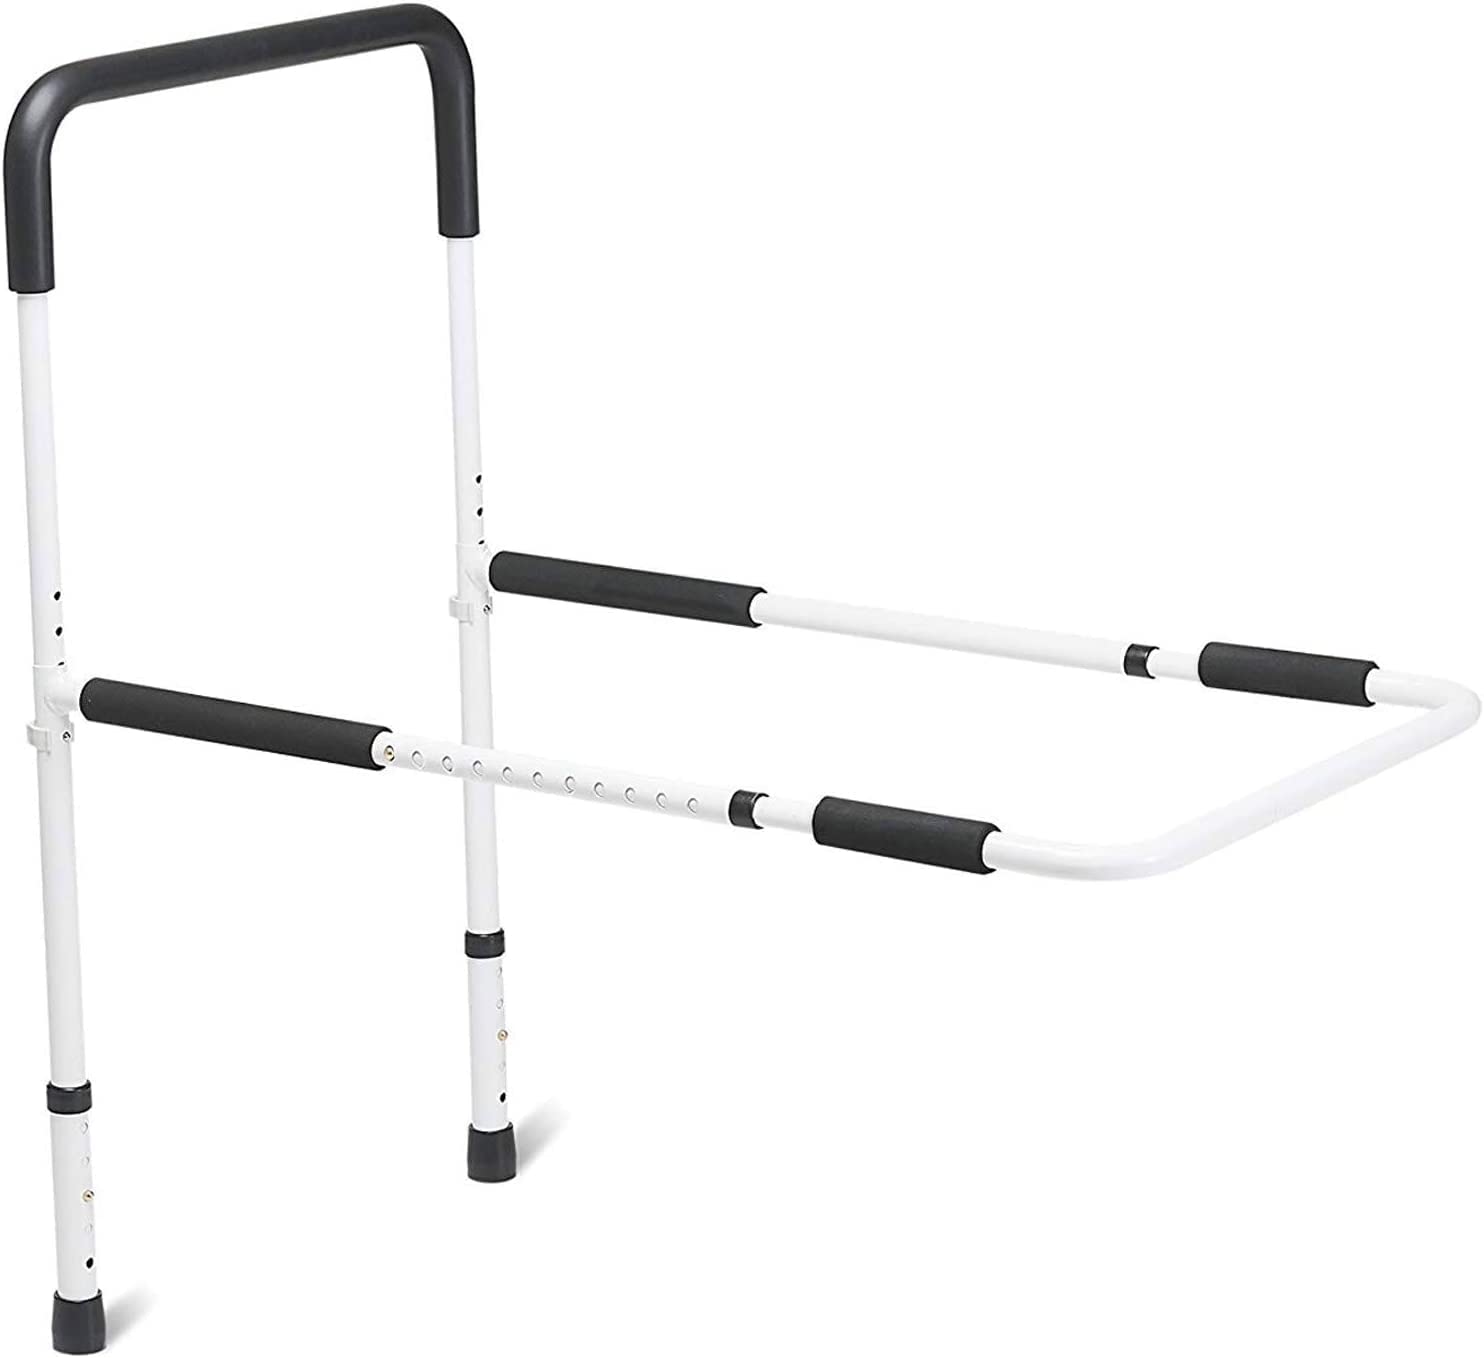 DMI Bed Rail with Adjustable Handle Height and Tool Free Assembly, Eldery Assistance Product, Bed Assist Rail